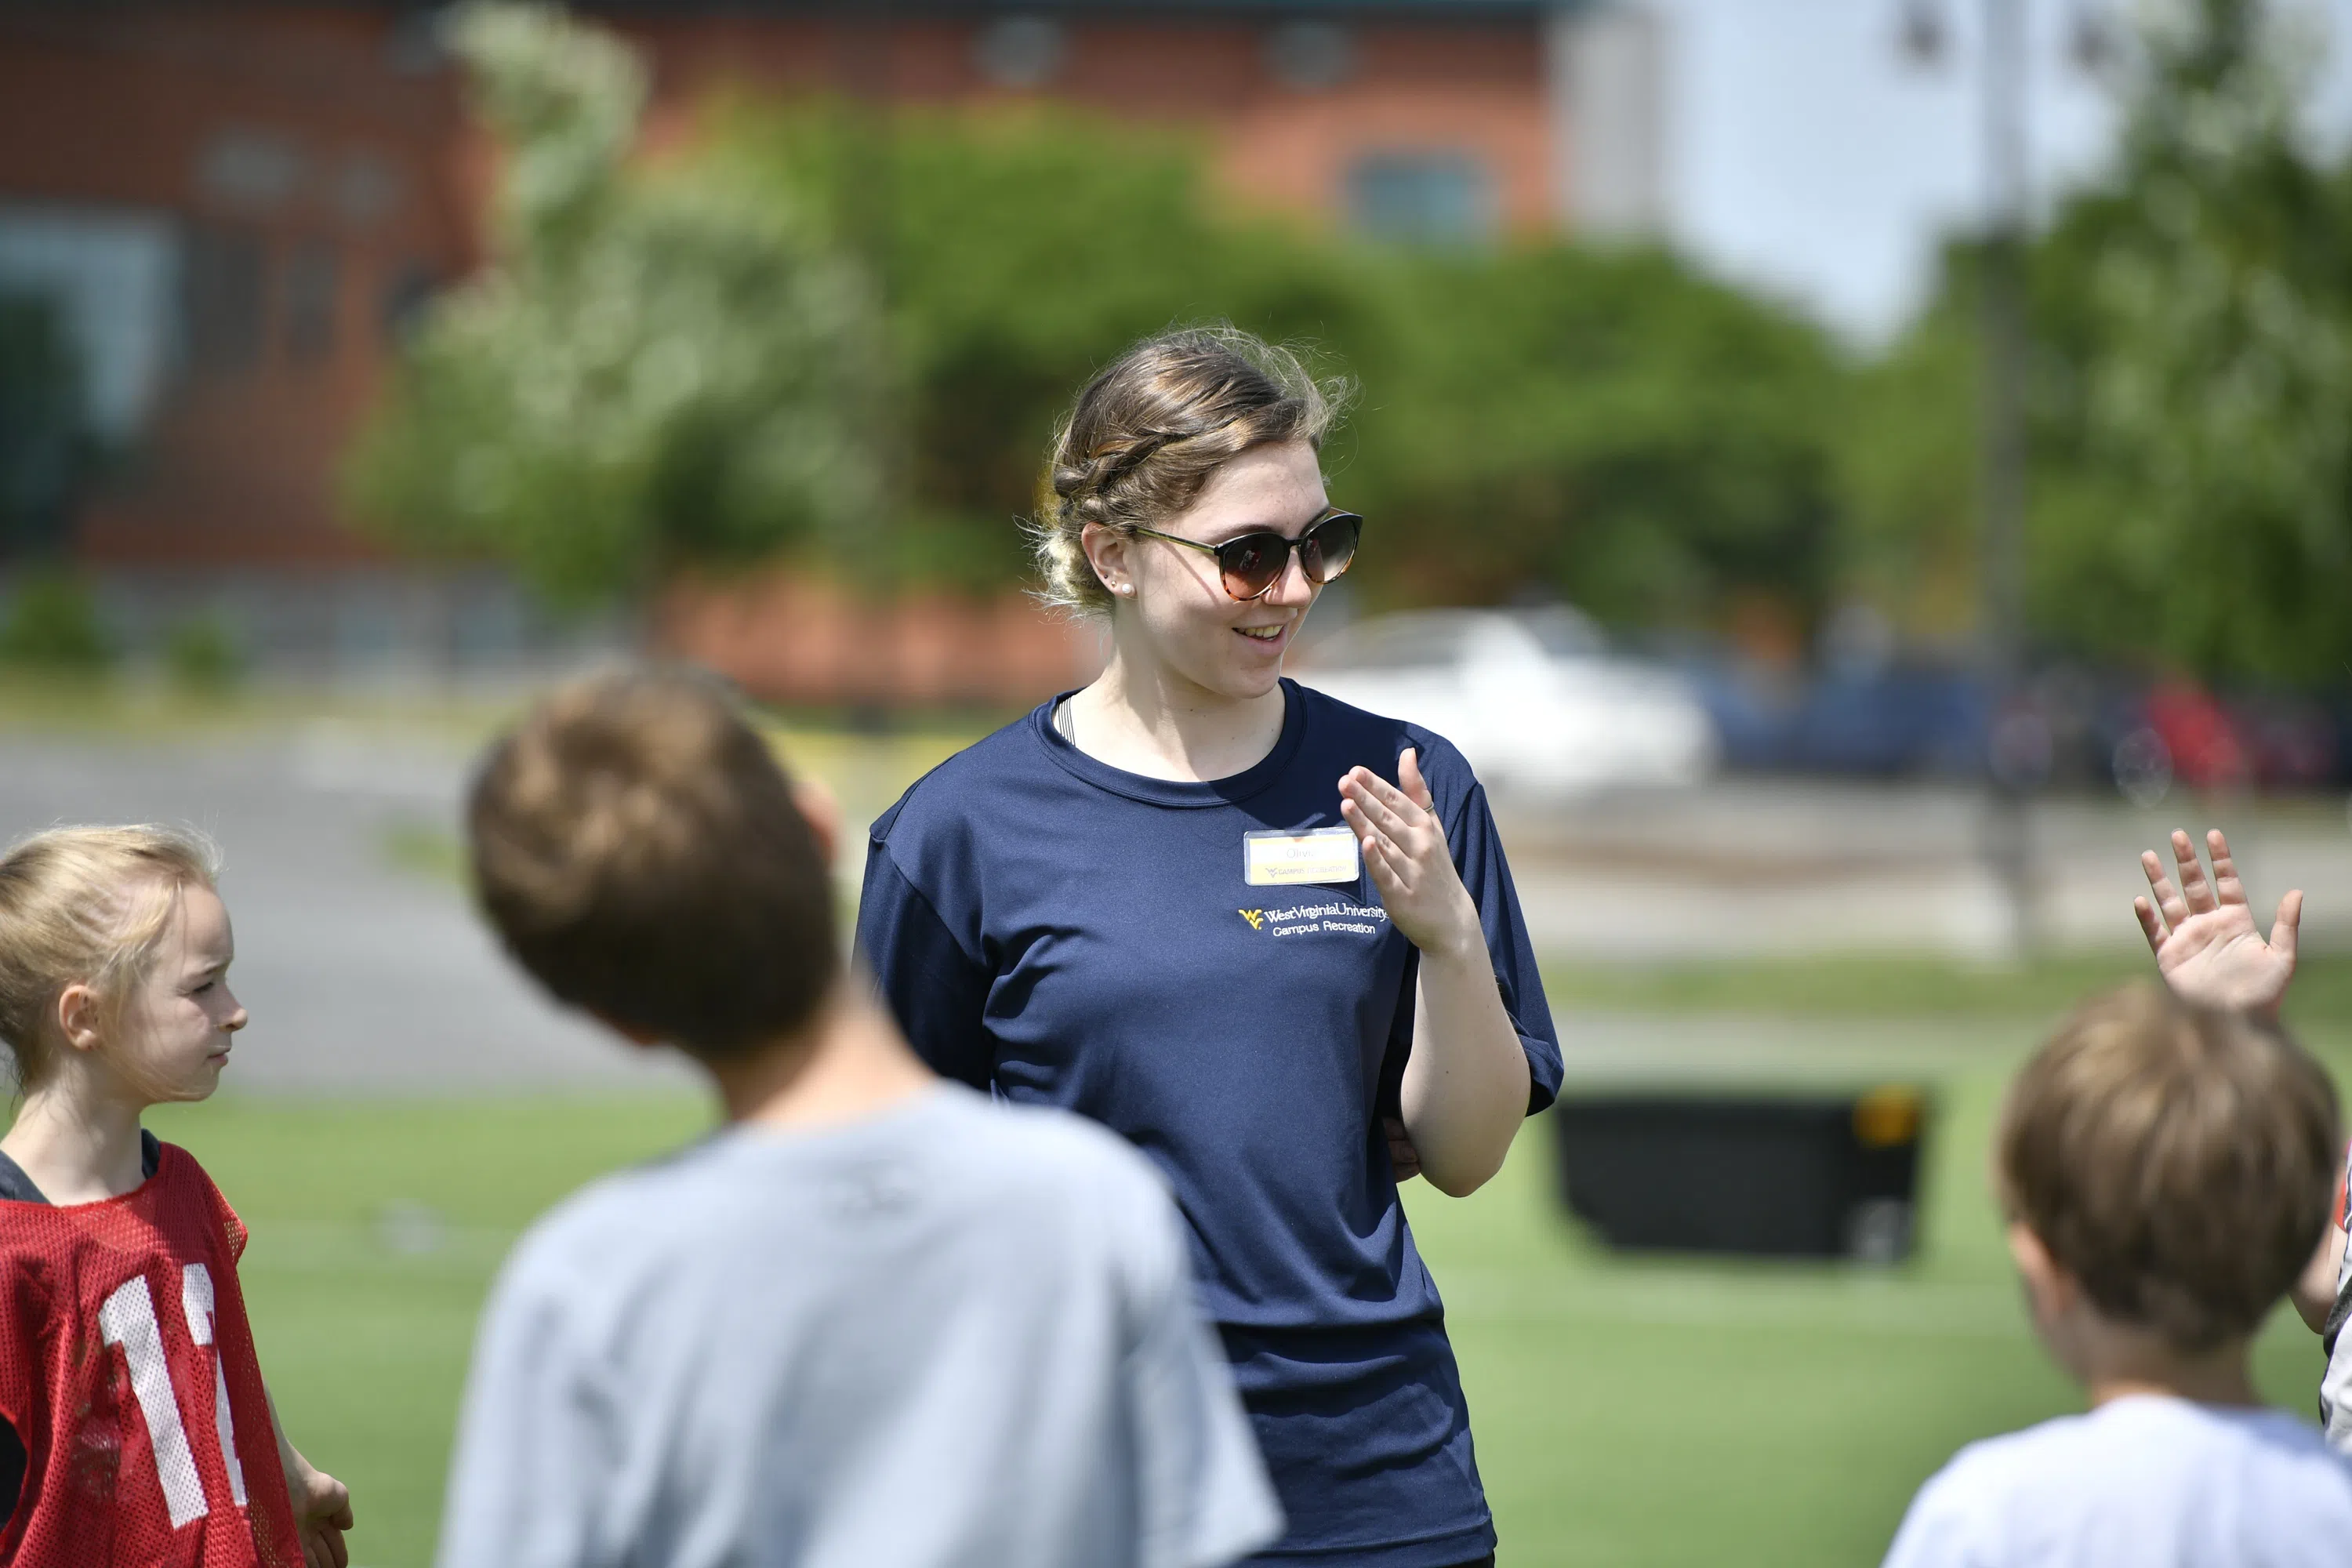 CPASS Student leading a coaching class with children. 